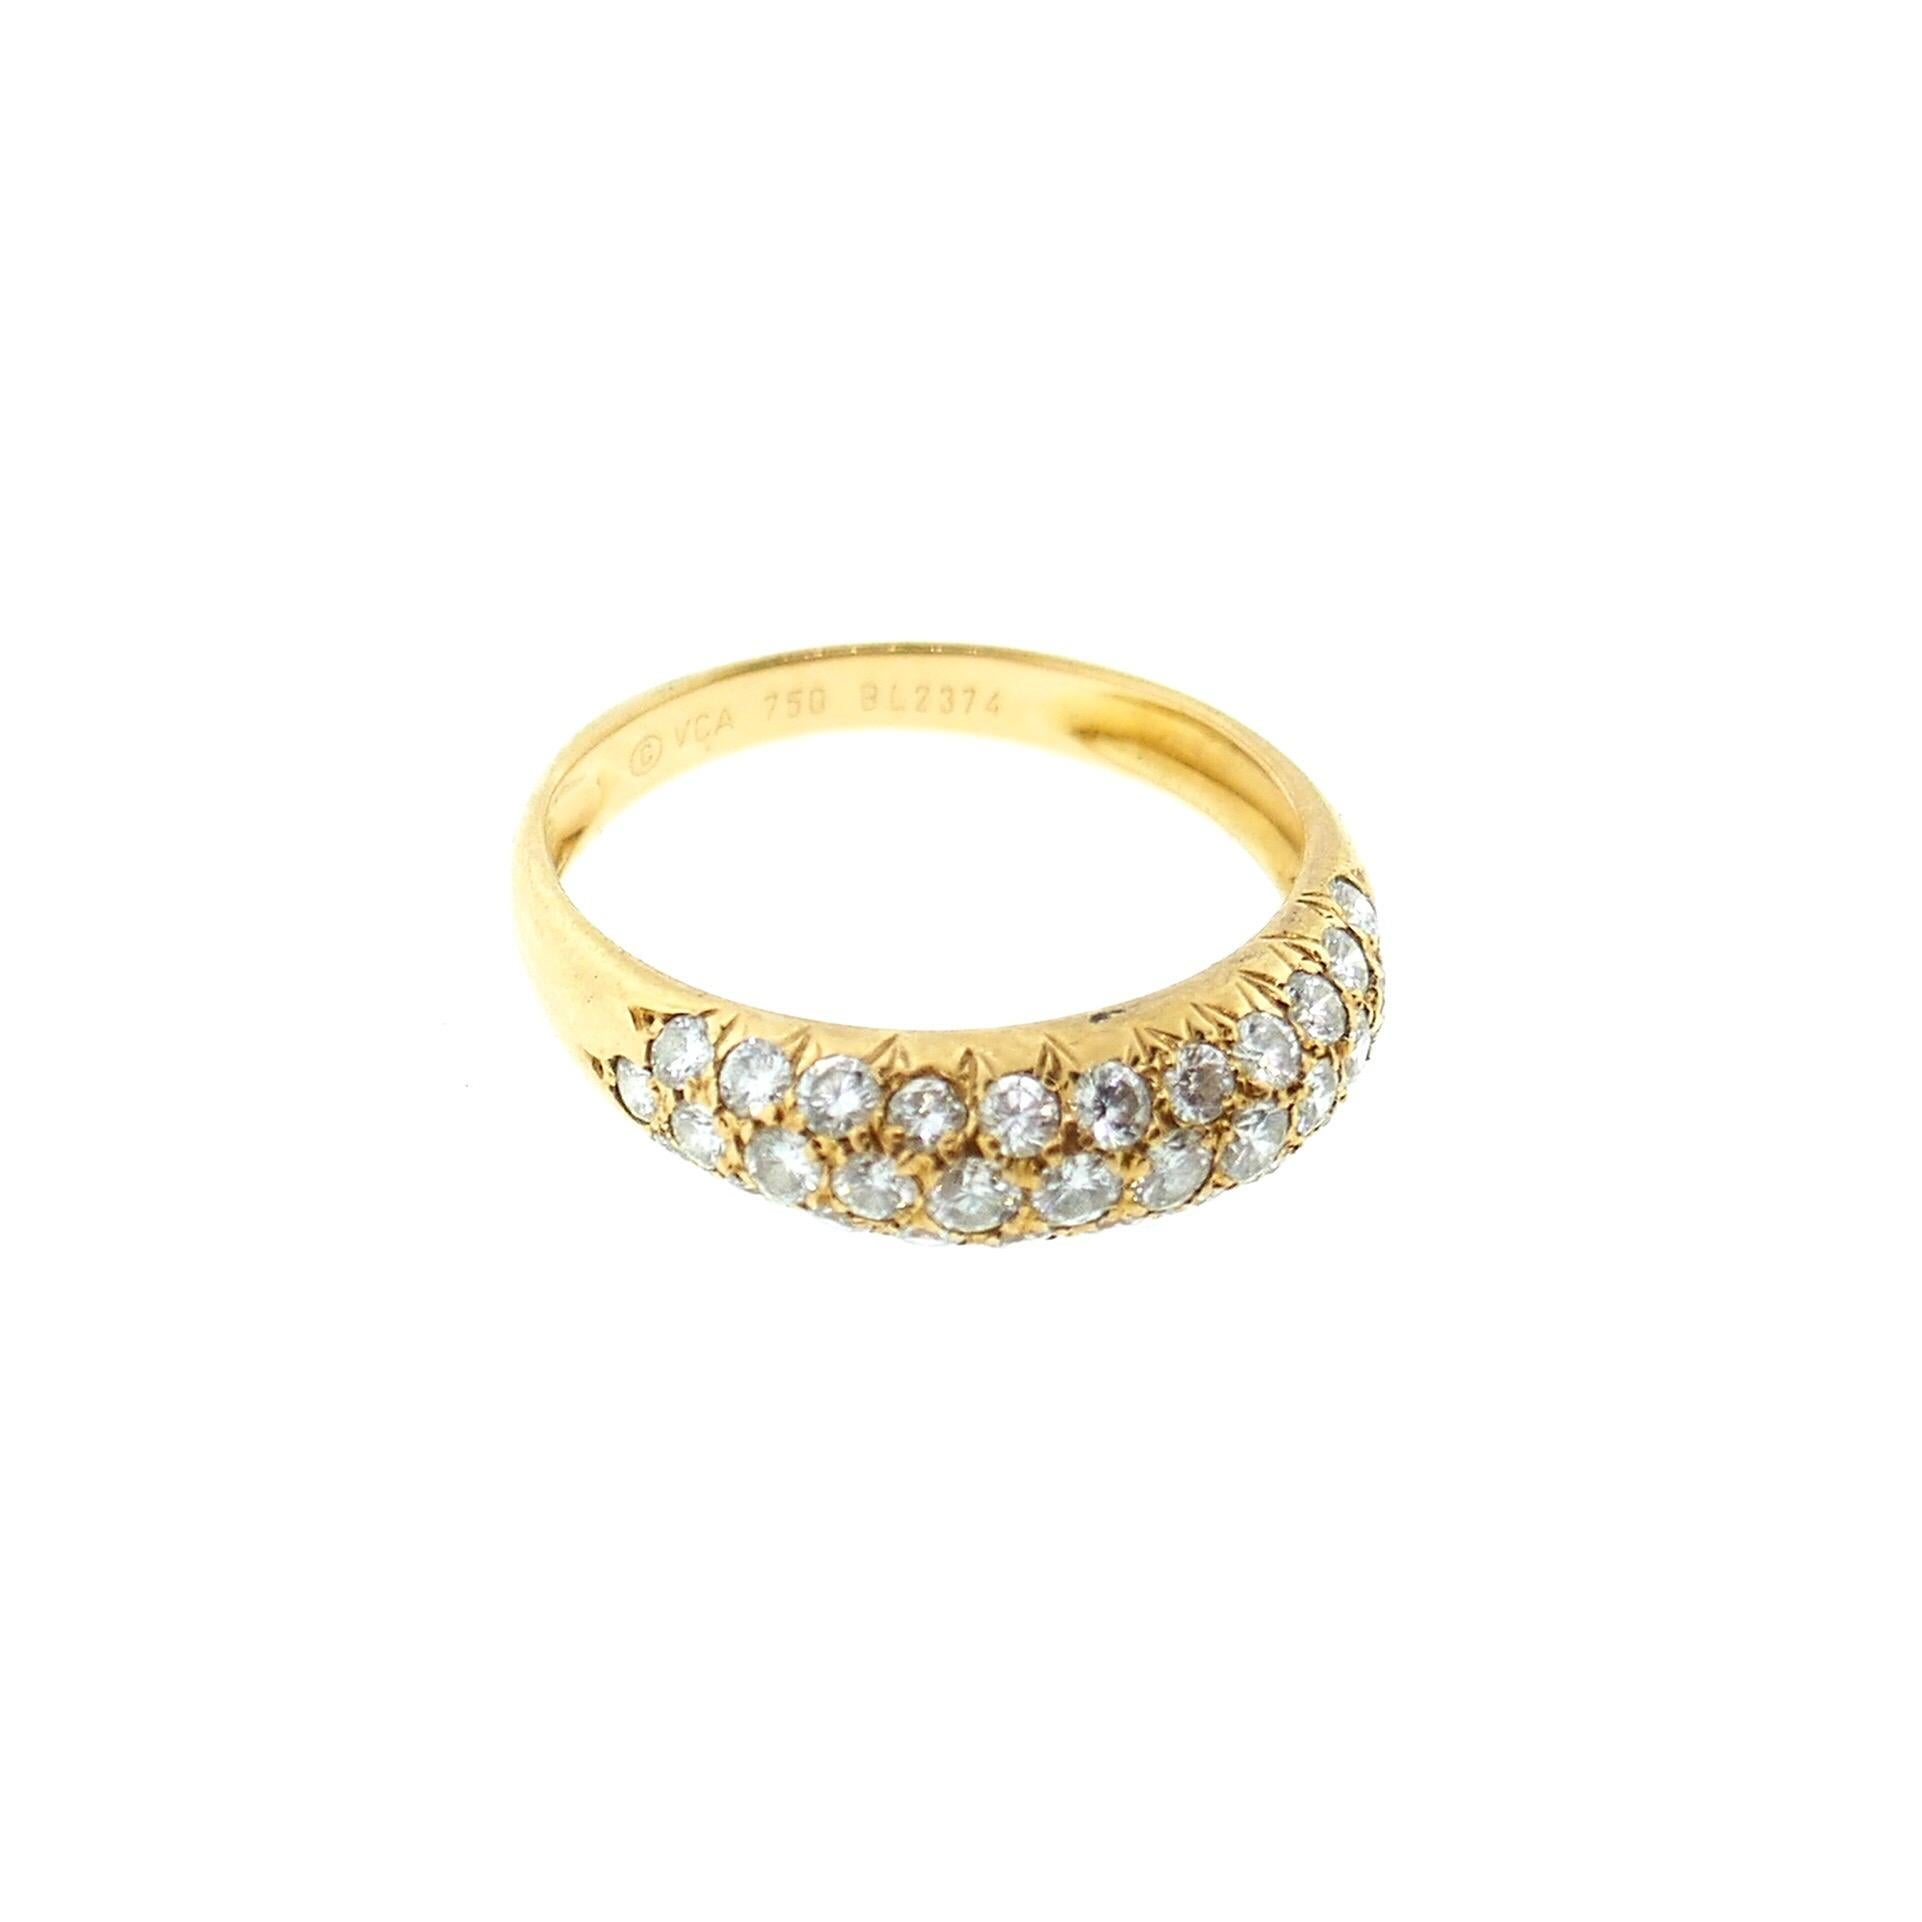 Van Cleef & Arpels 18 Karat Yellow Gold Pave Diamond Band Ring

This is an amazing Van Cleef & Arpels ring. The diamonds shine beautifully. The total carat weight of the diamonds is approximately 1.1 carats (colorless; vvs+). Classic, vertical and